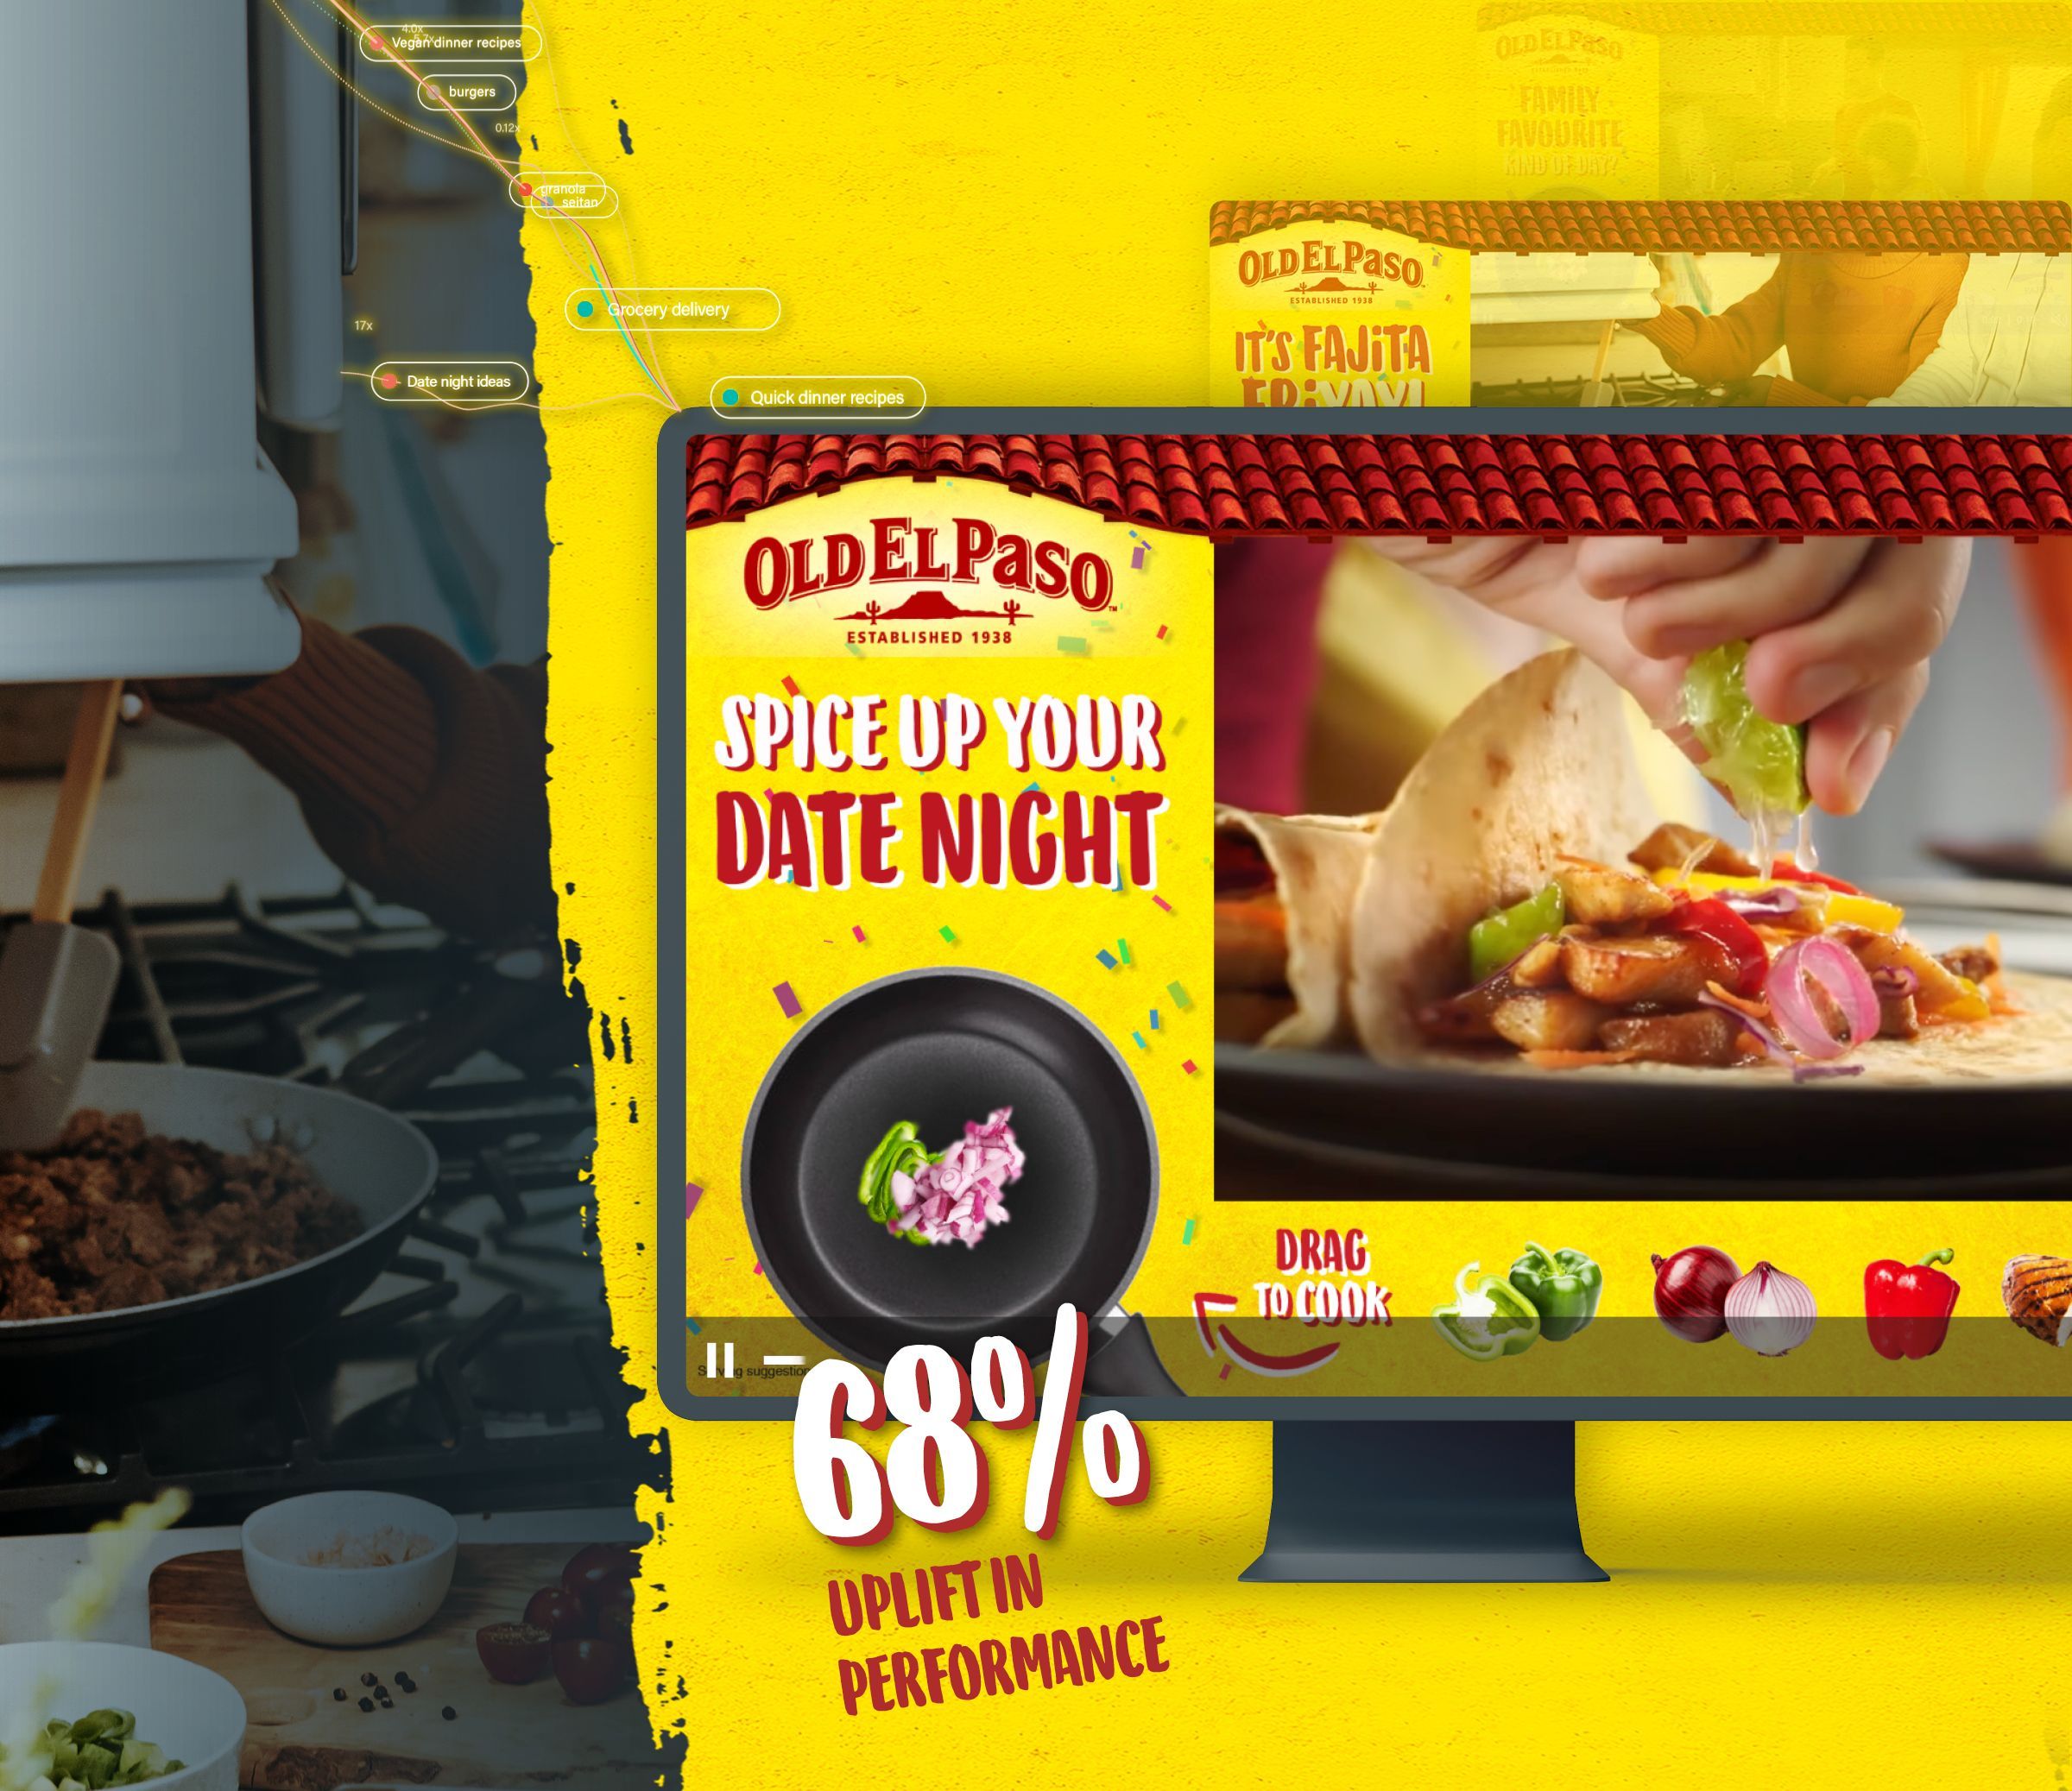 Old El Paso: Combining Search Data and Dynamic Creative to Spice Up Date Night for Old El Paso Audiences